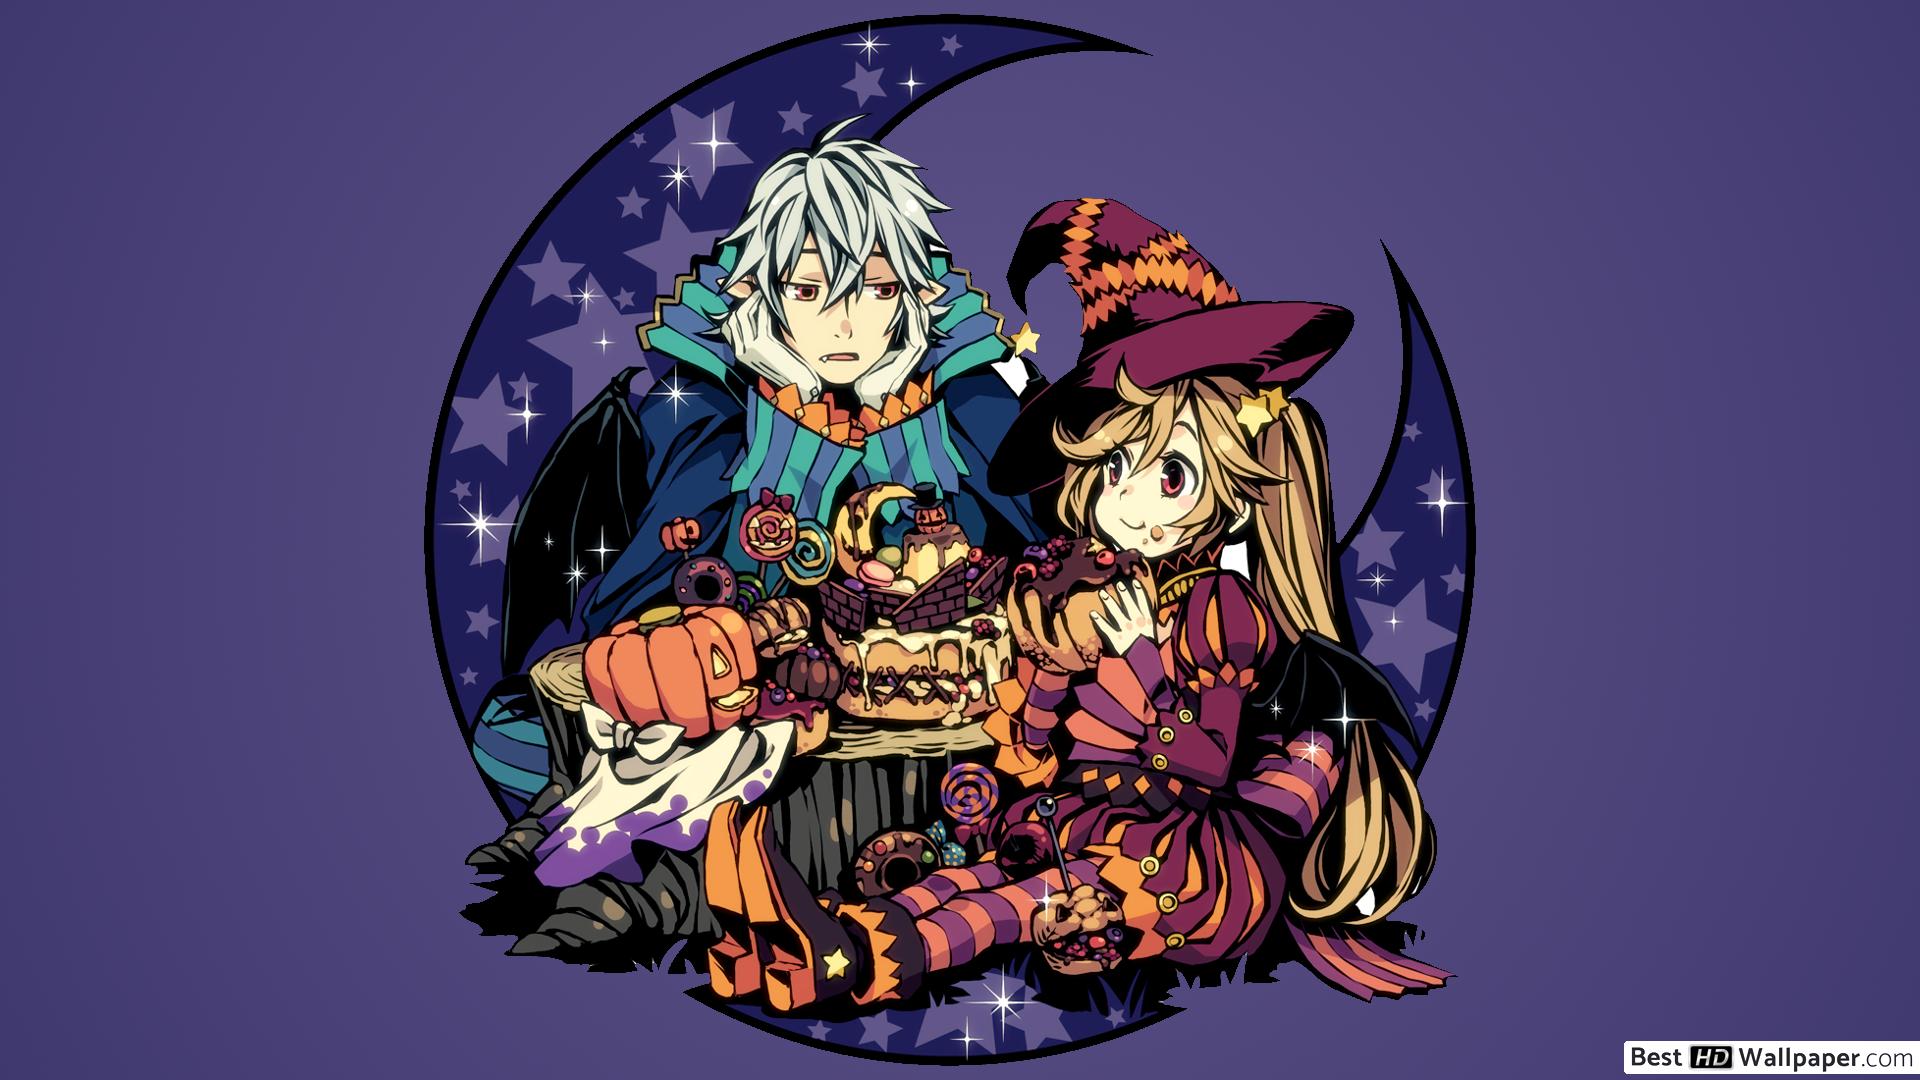 Halloween Profile Pictures Anime - 1920x1080 Wallpaper 